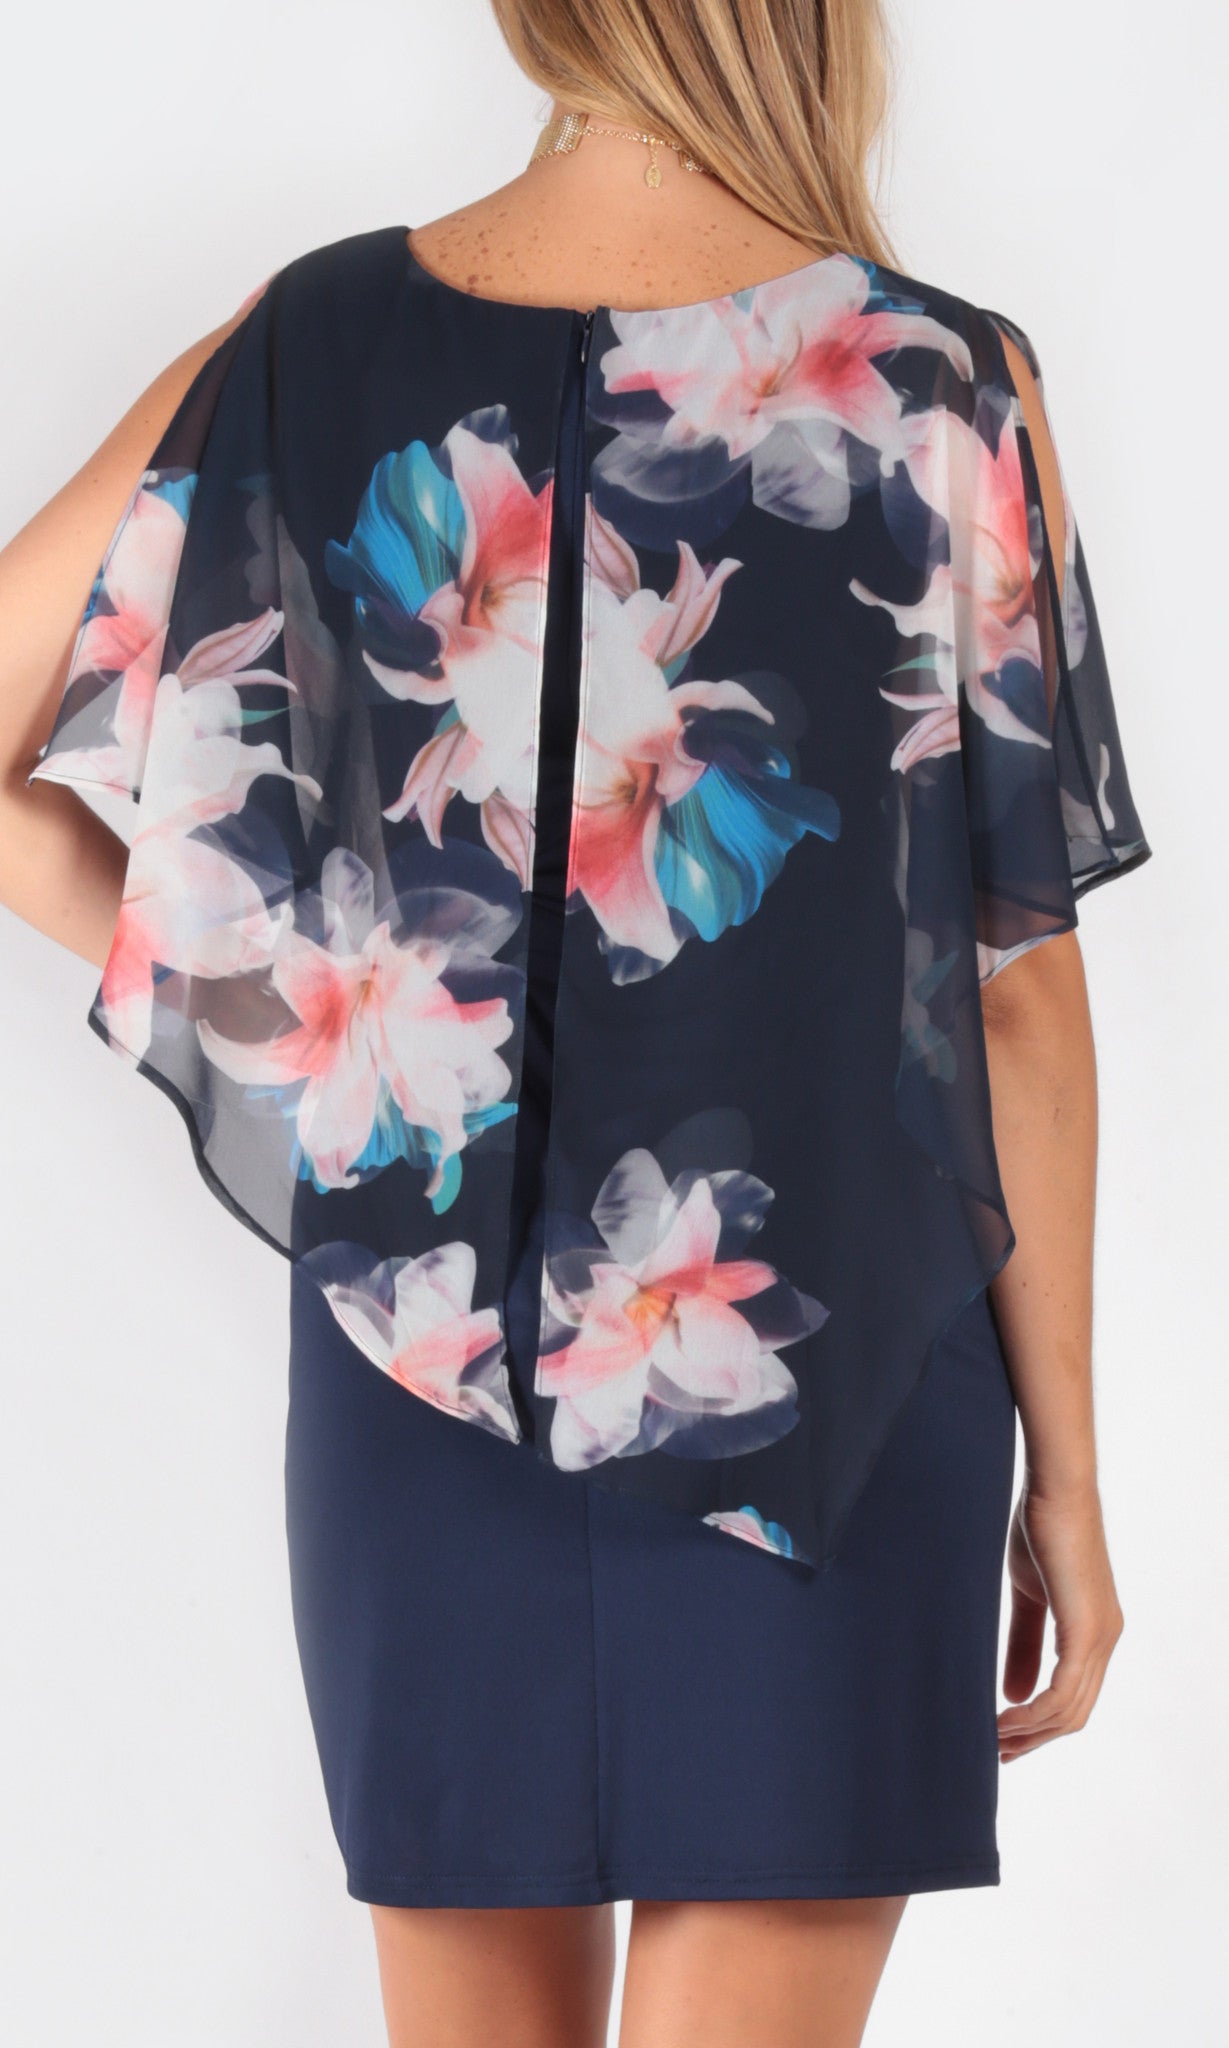  Blues and Pinks Floral Chiffon Overlay Dress